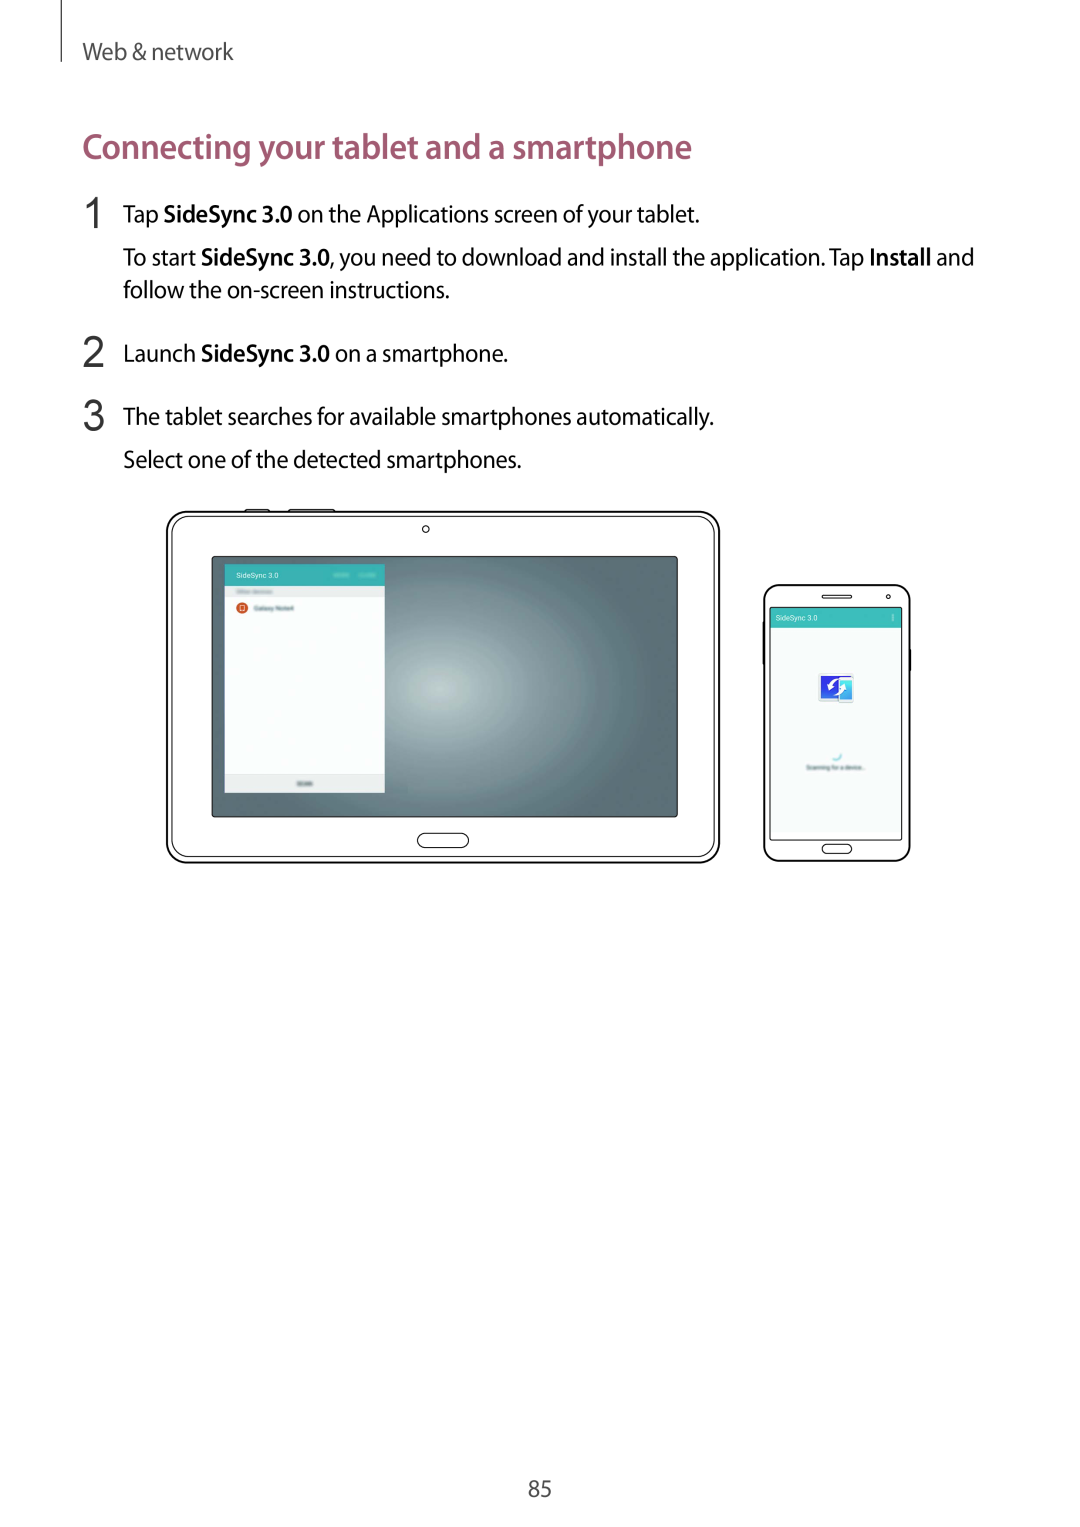 Samsung SM-P9000ZKAXEH manual Connecting your tablet and a smartphone, Web & network, Launch SideSync 3.0 on a smartphone 